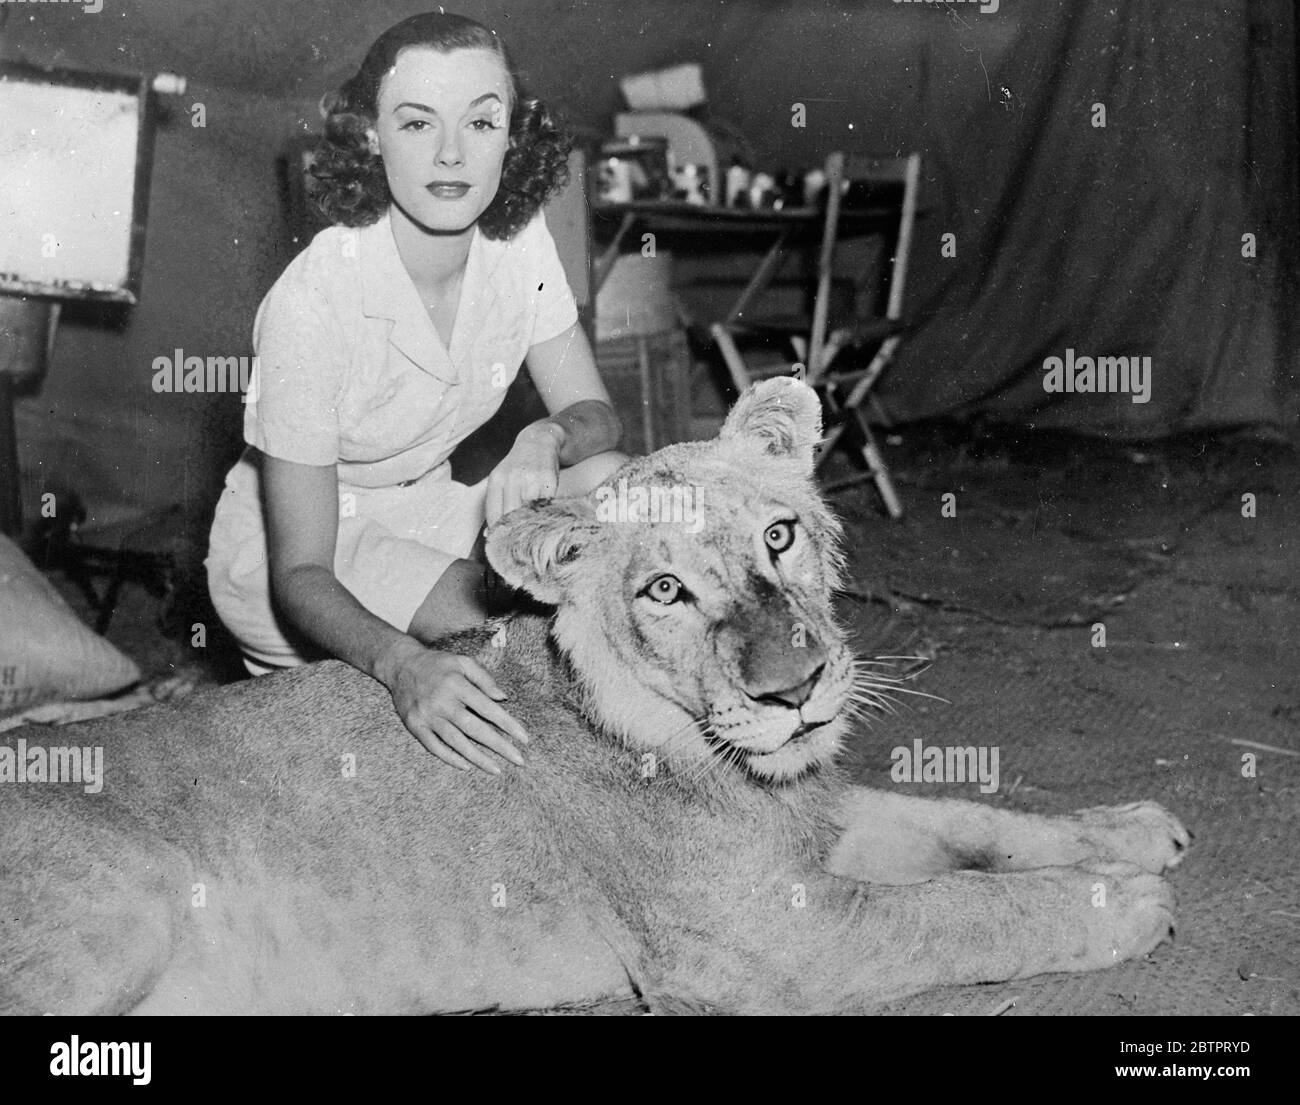 Film friends!. Eleanor Holm Jarrett, the film actress makes friends with one of the lions taking part in her new film 'Tarzan's Revenge' in Hollywood. The lioness appears, however, to be as gentle as one of her breed can be. Stock Photo